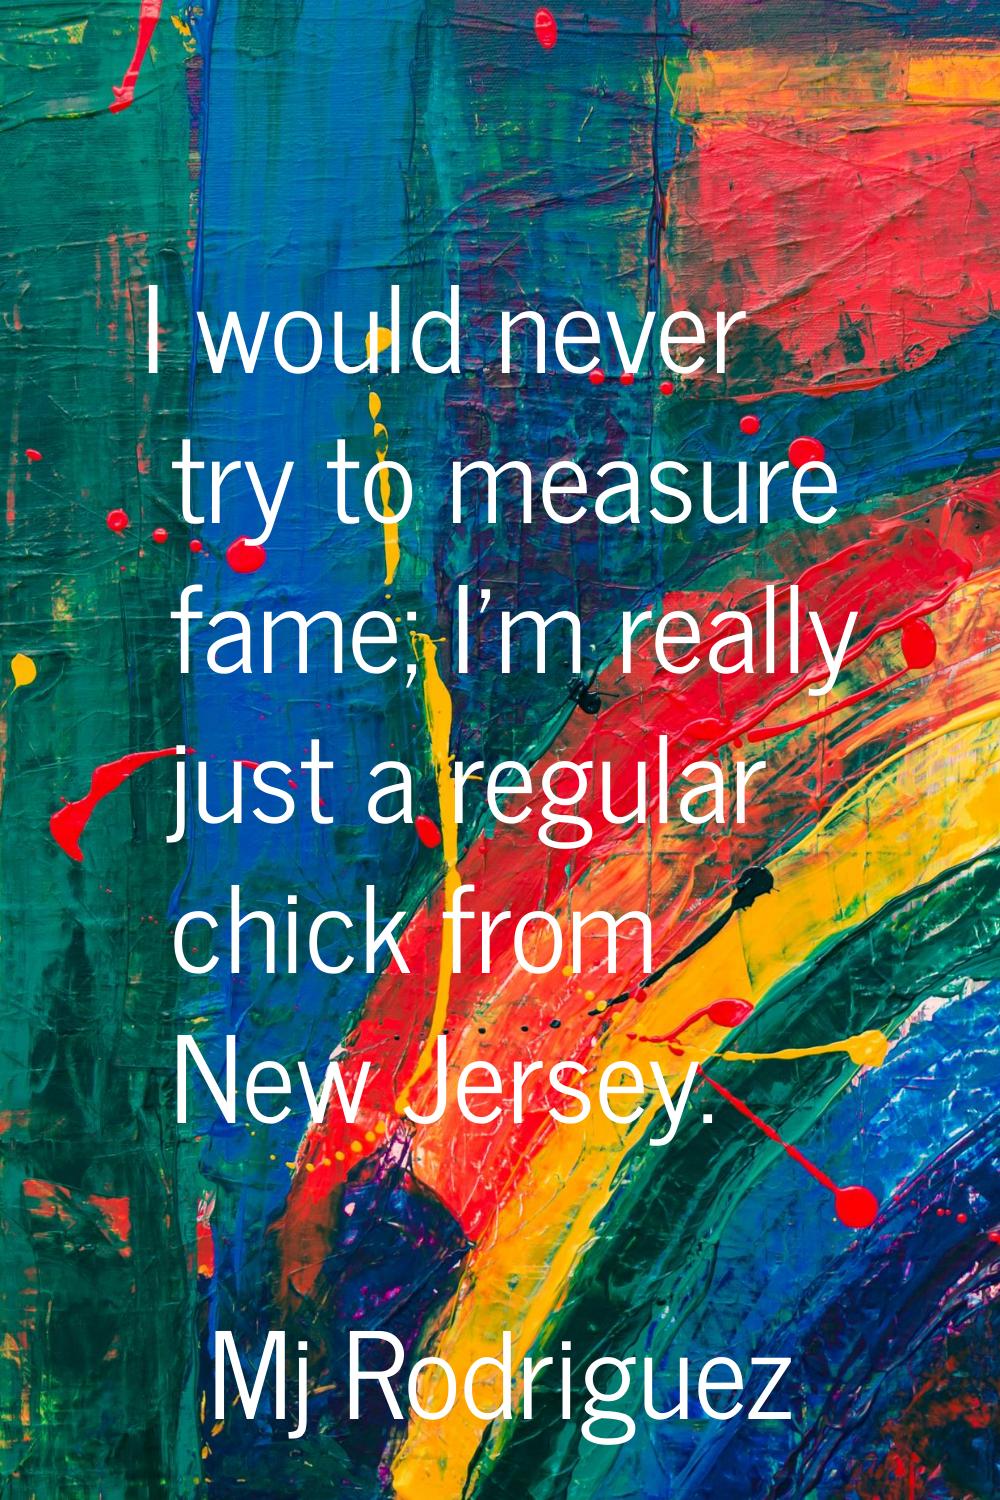 I would never try to measure fame; I'm really just a regular chick from New Jersey.